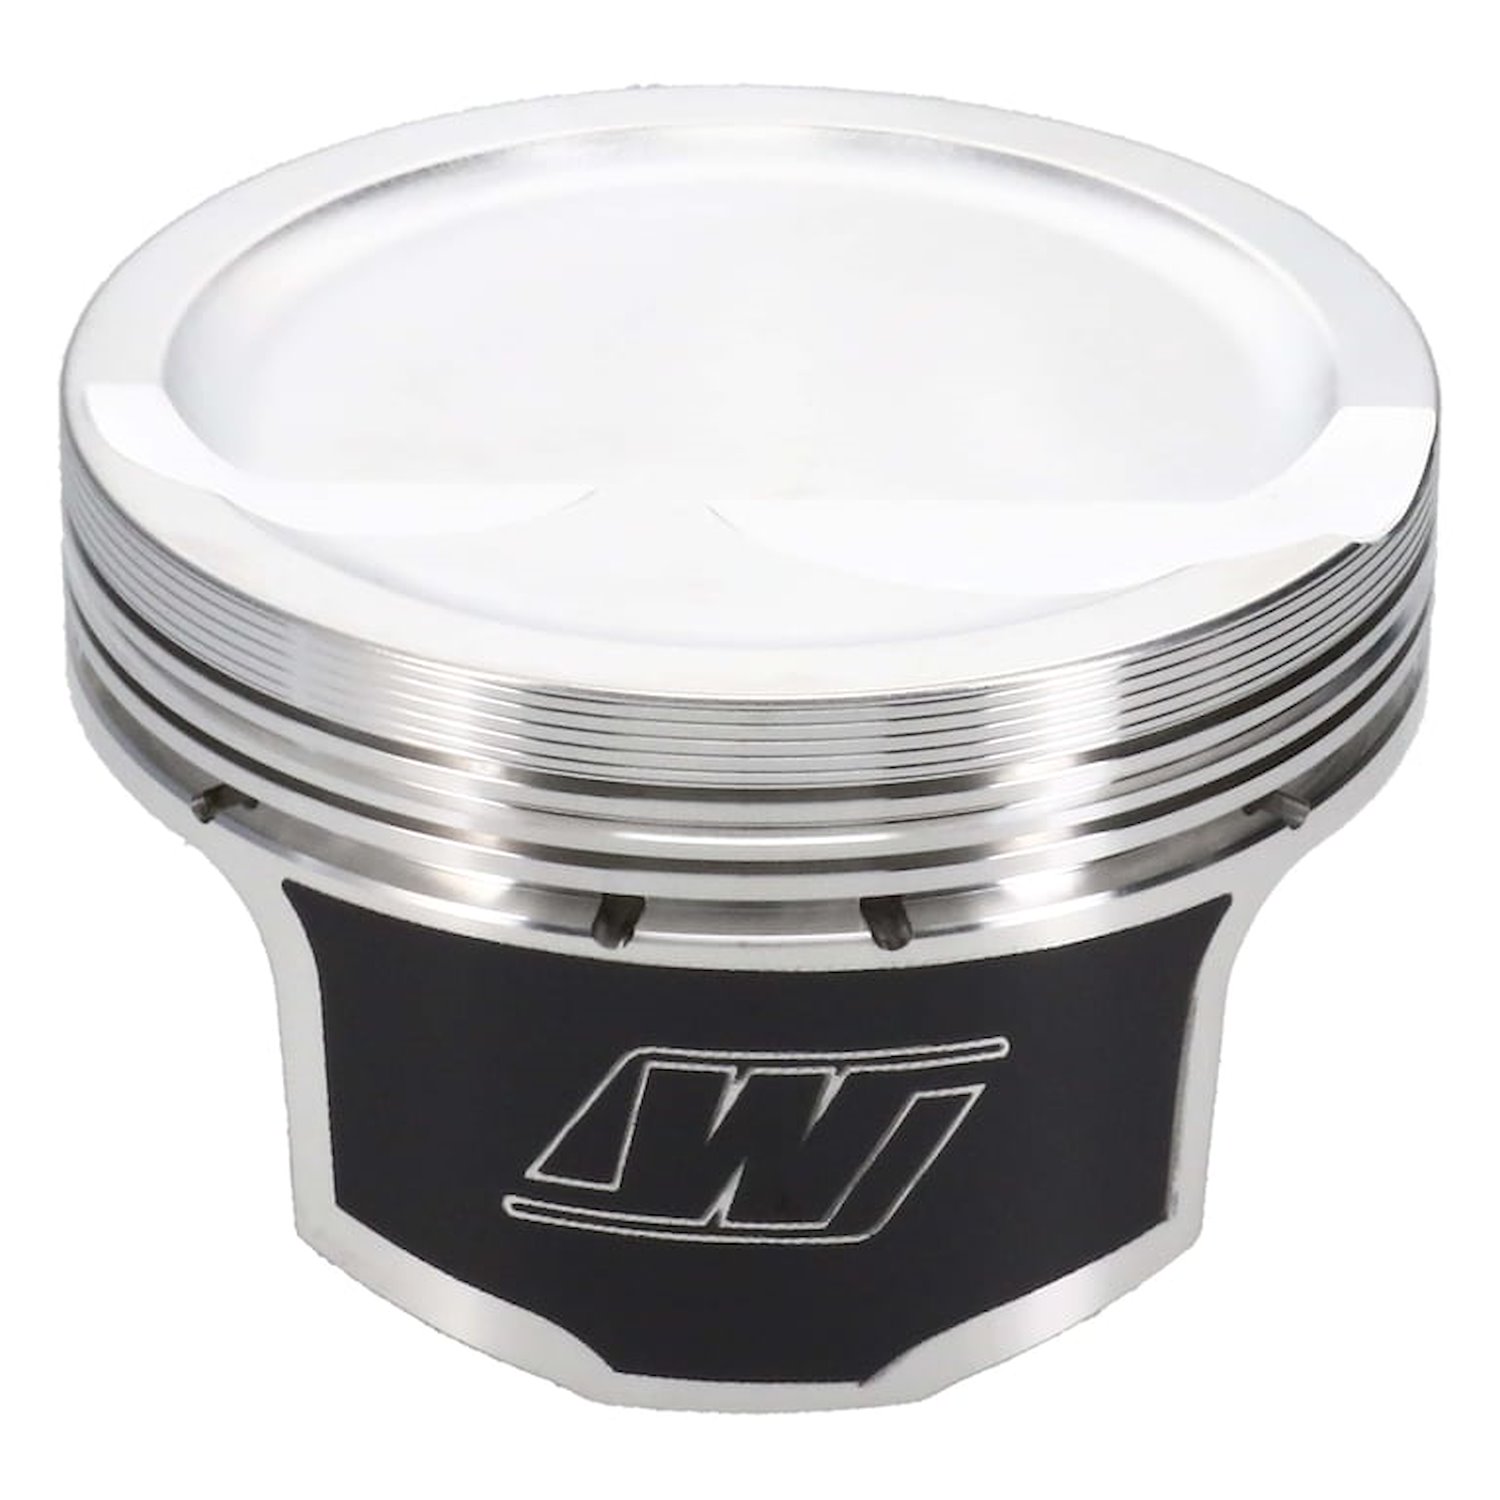 RED0081X145 RED-Series Piston Set, Chevy LS, 4.145 in. Bore, -15 cc Dish